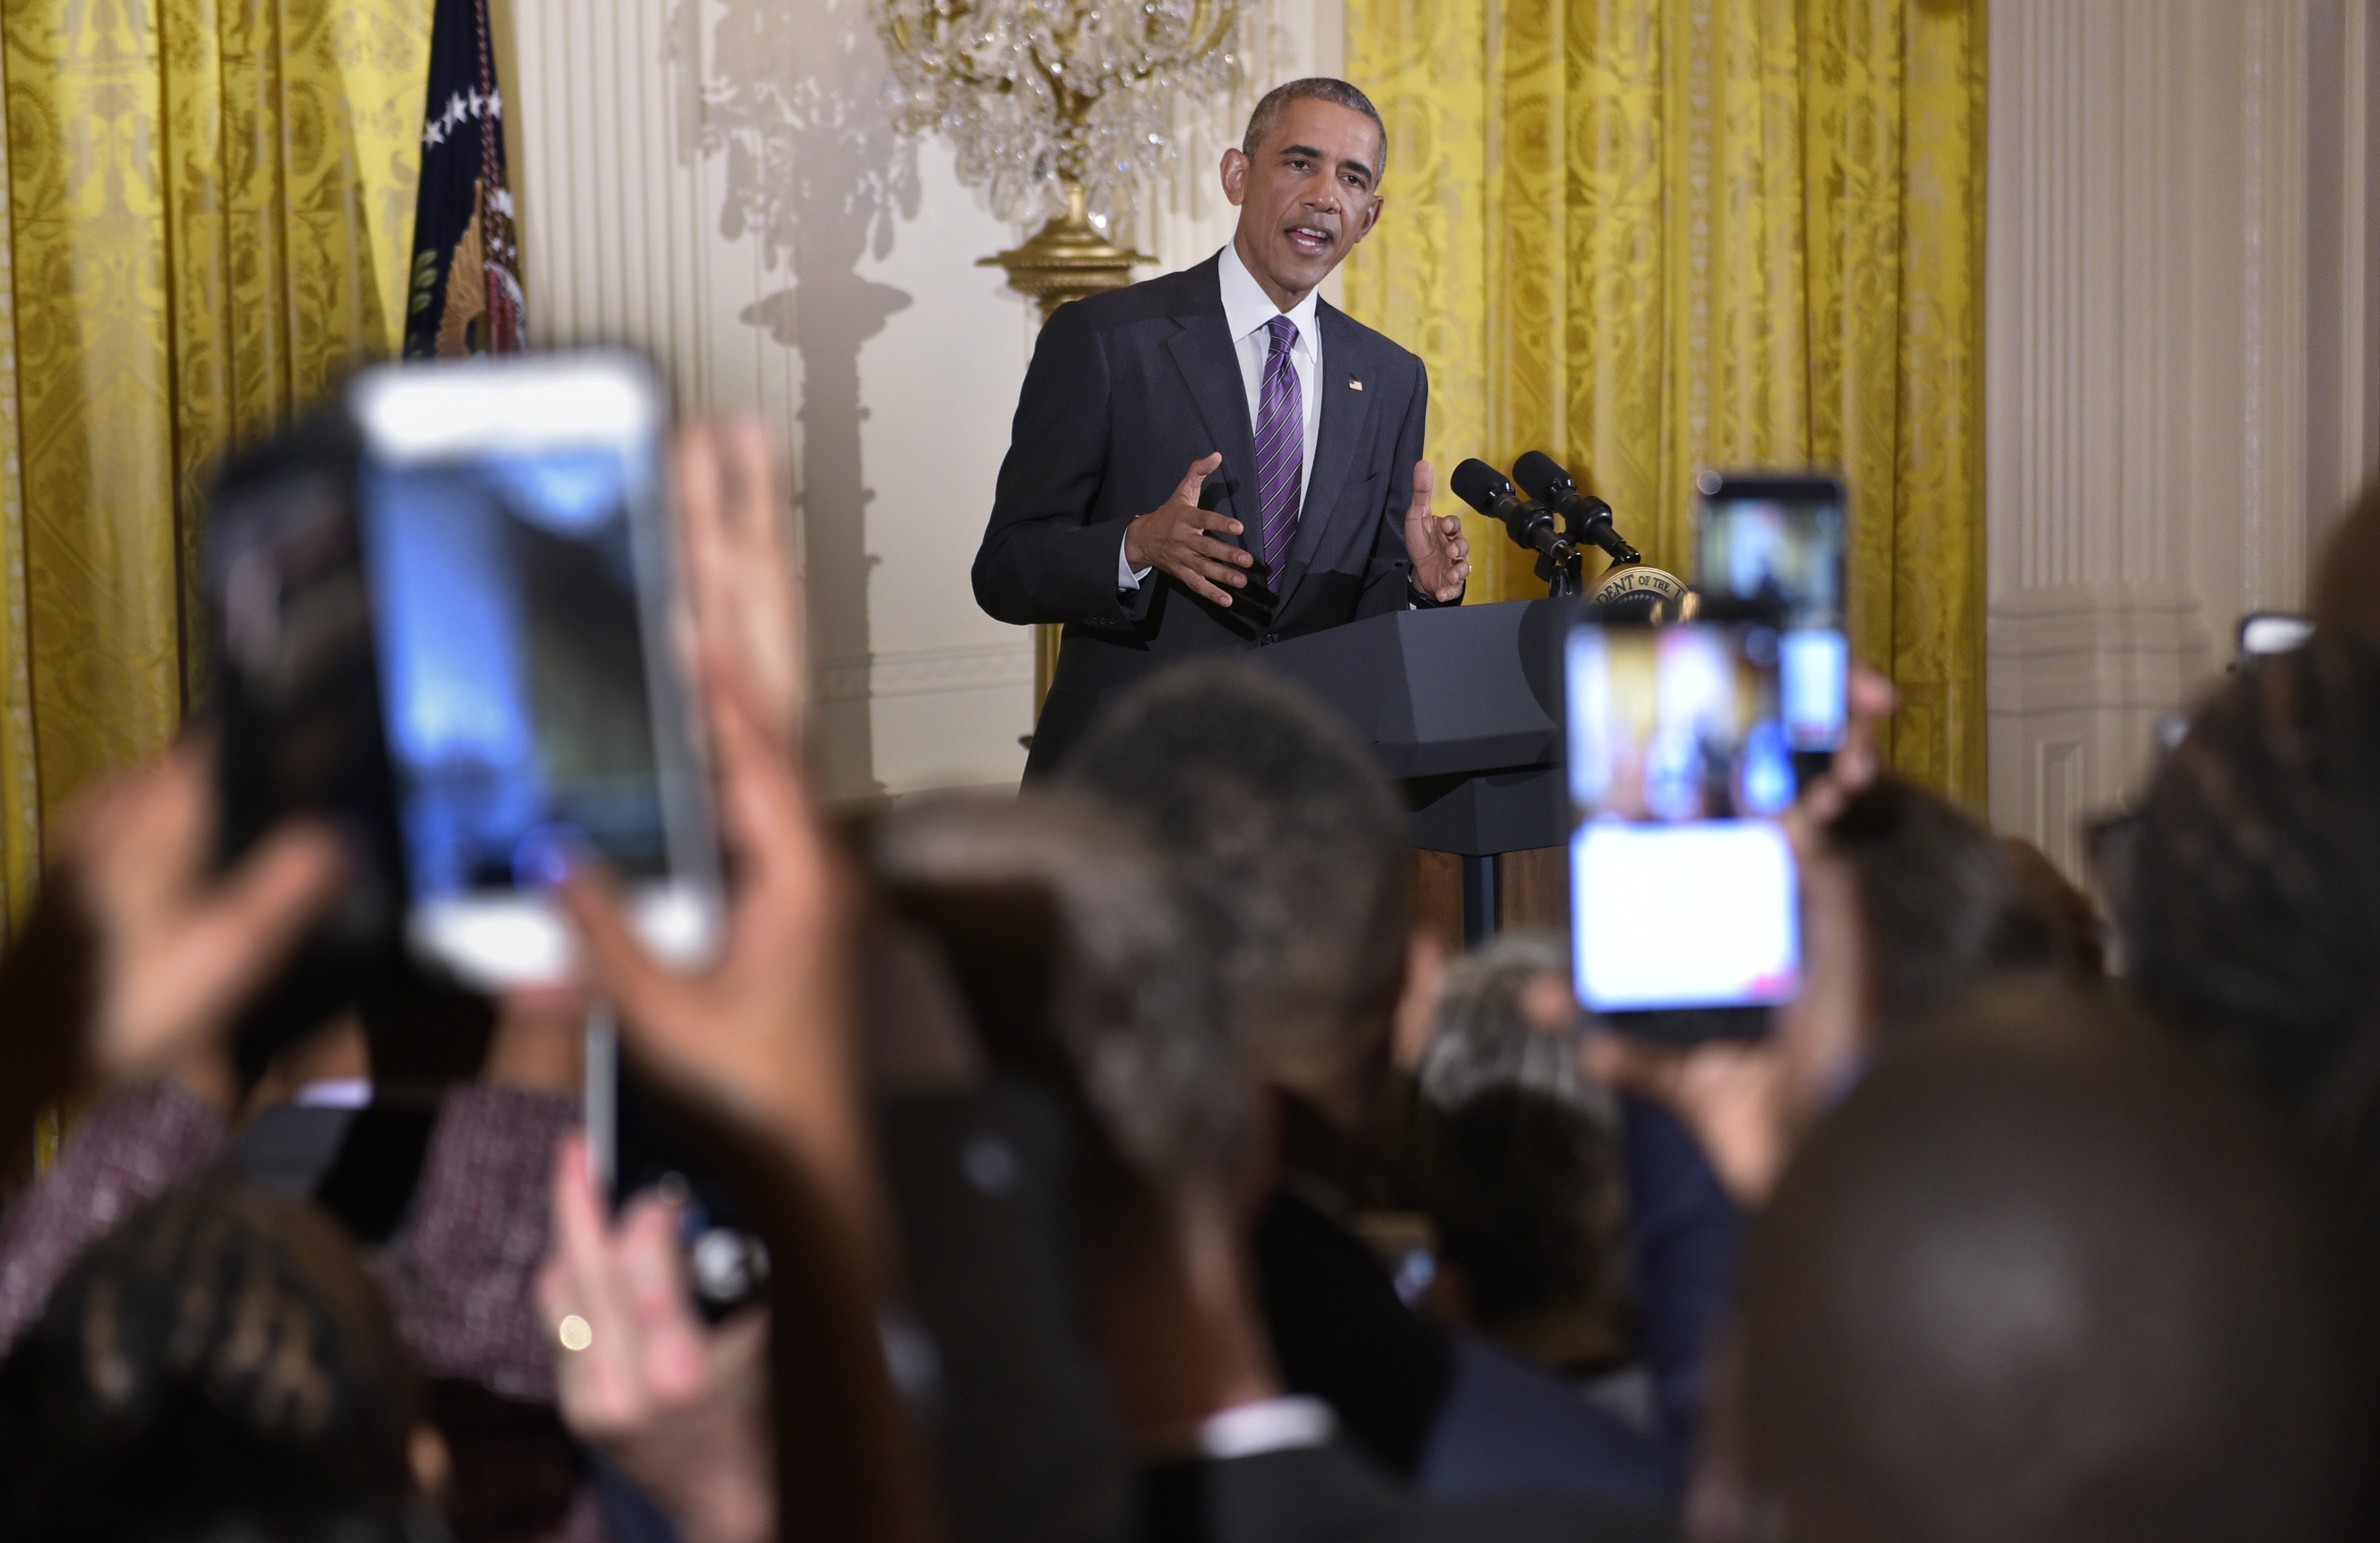 US President Barack Obama speaks during a reception to mark LGBT month in the East Room of the White House on June 9, 2016 in Washington, DC. / AFP PHOTO / Mandel Ngan